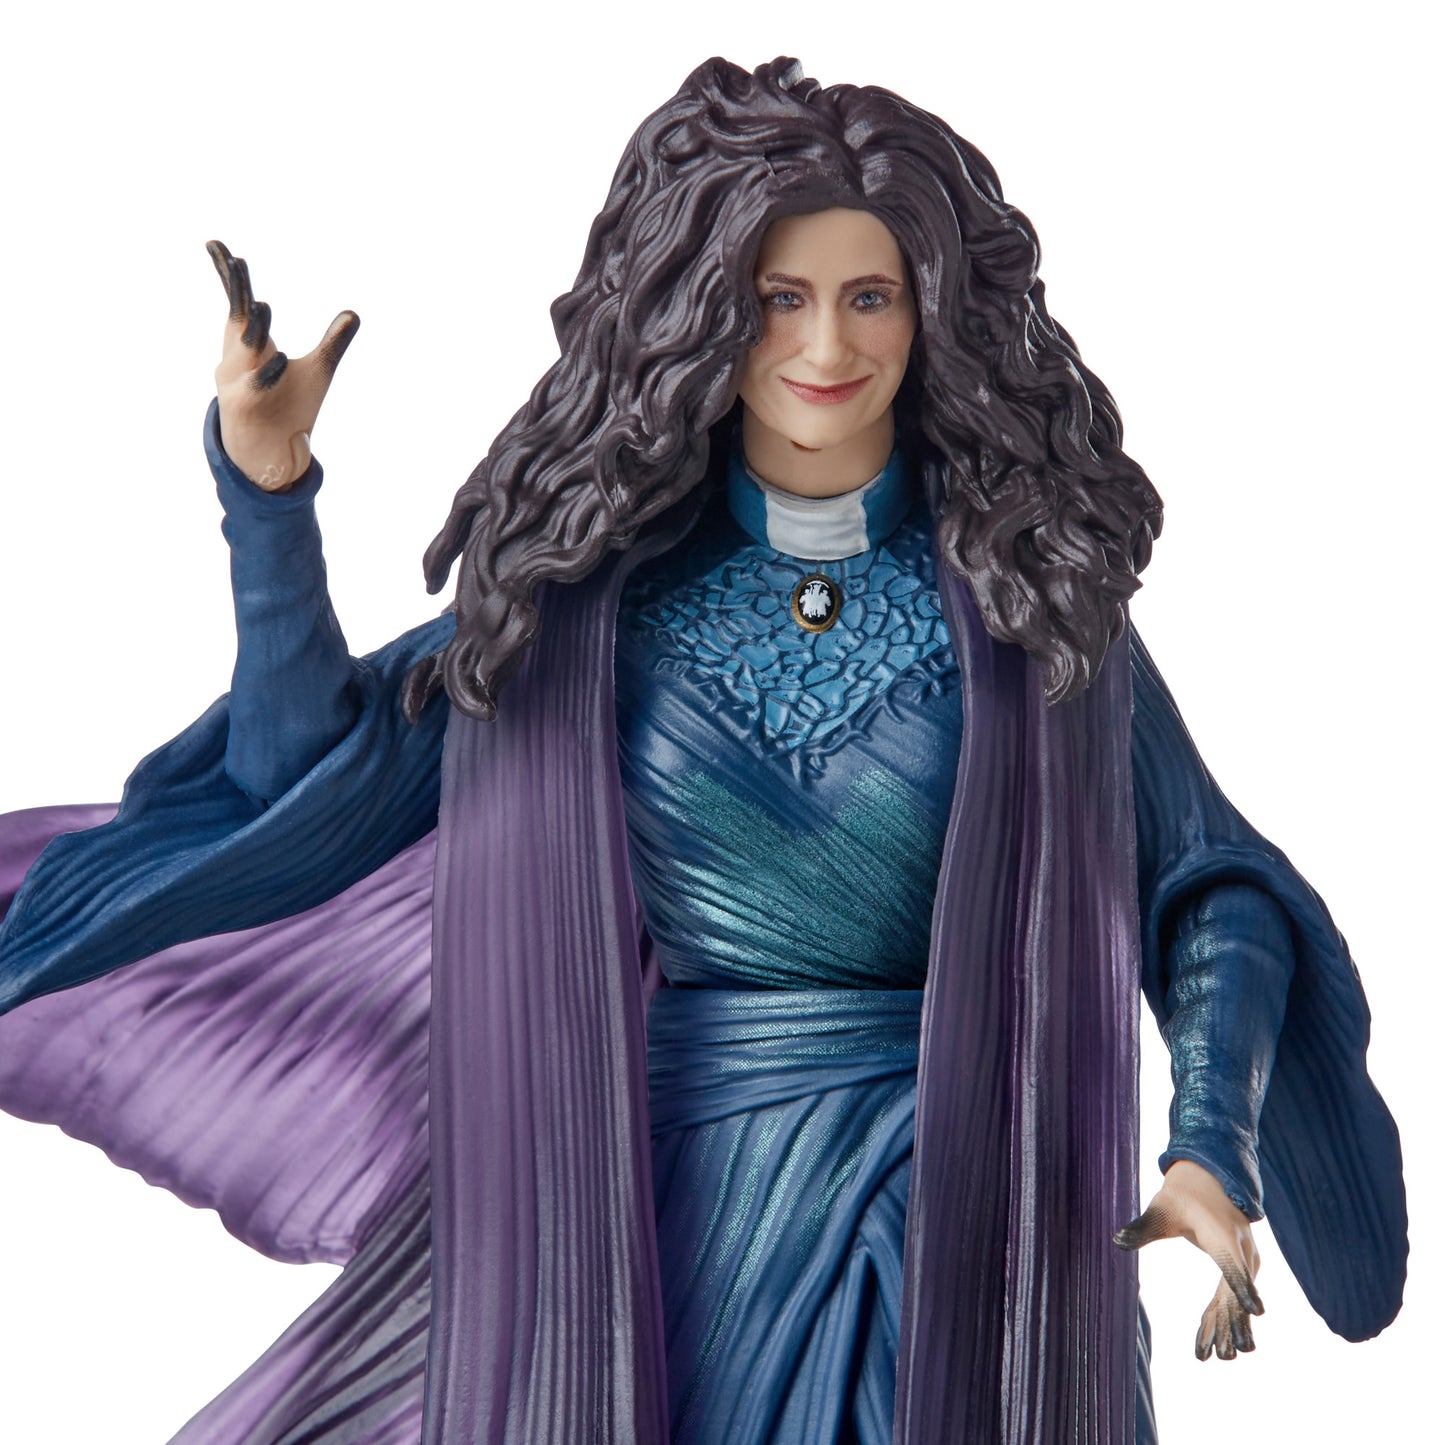 Marvel Legends Series Agatha Harkness Action Figure 6-Inch Toy close up look - Heretoserveyou